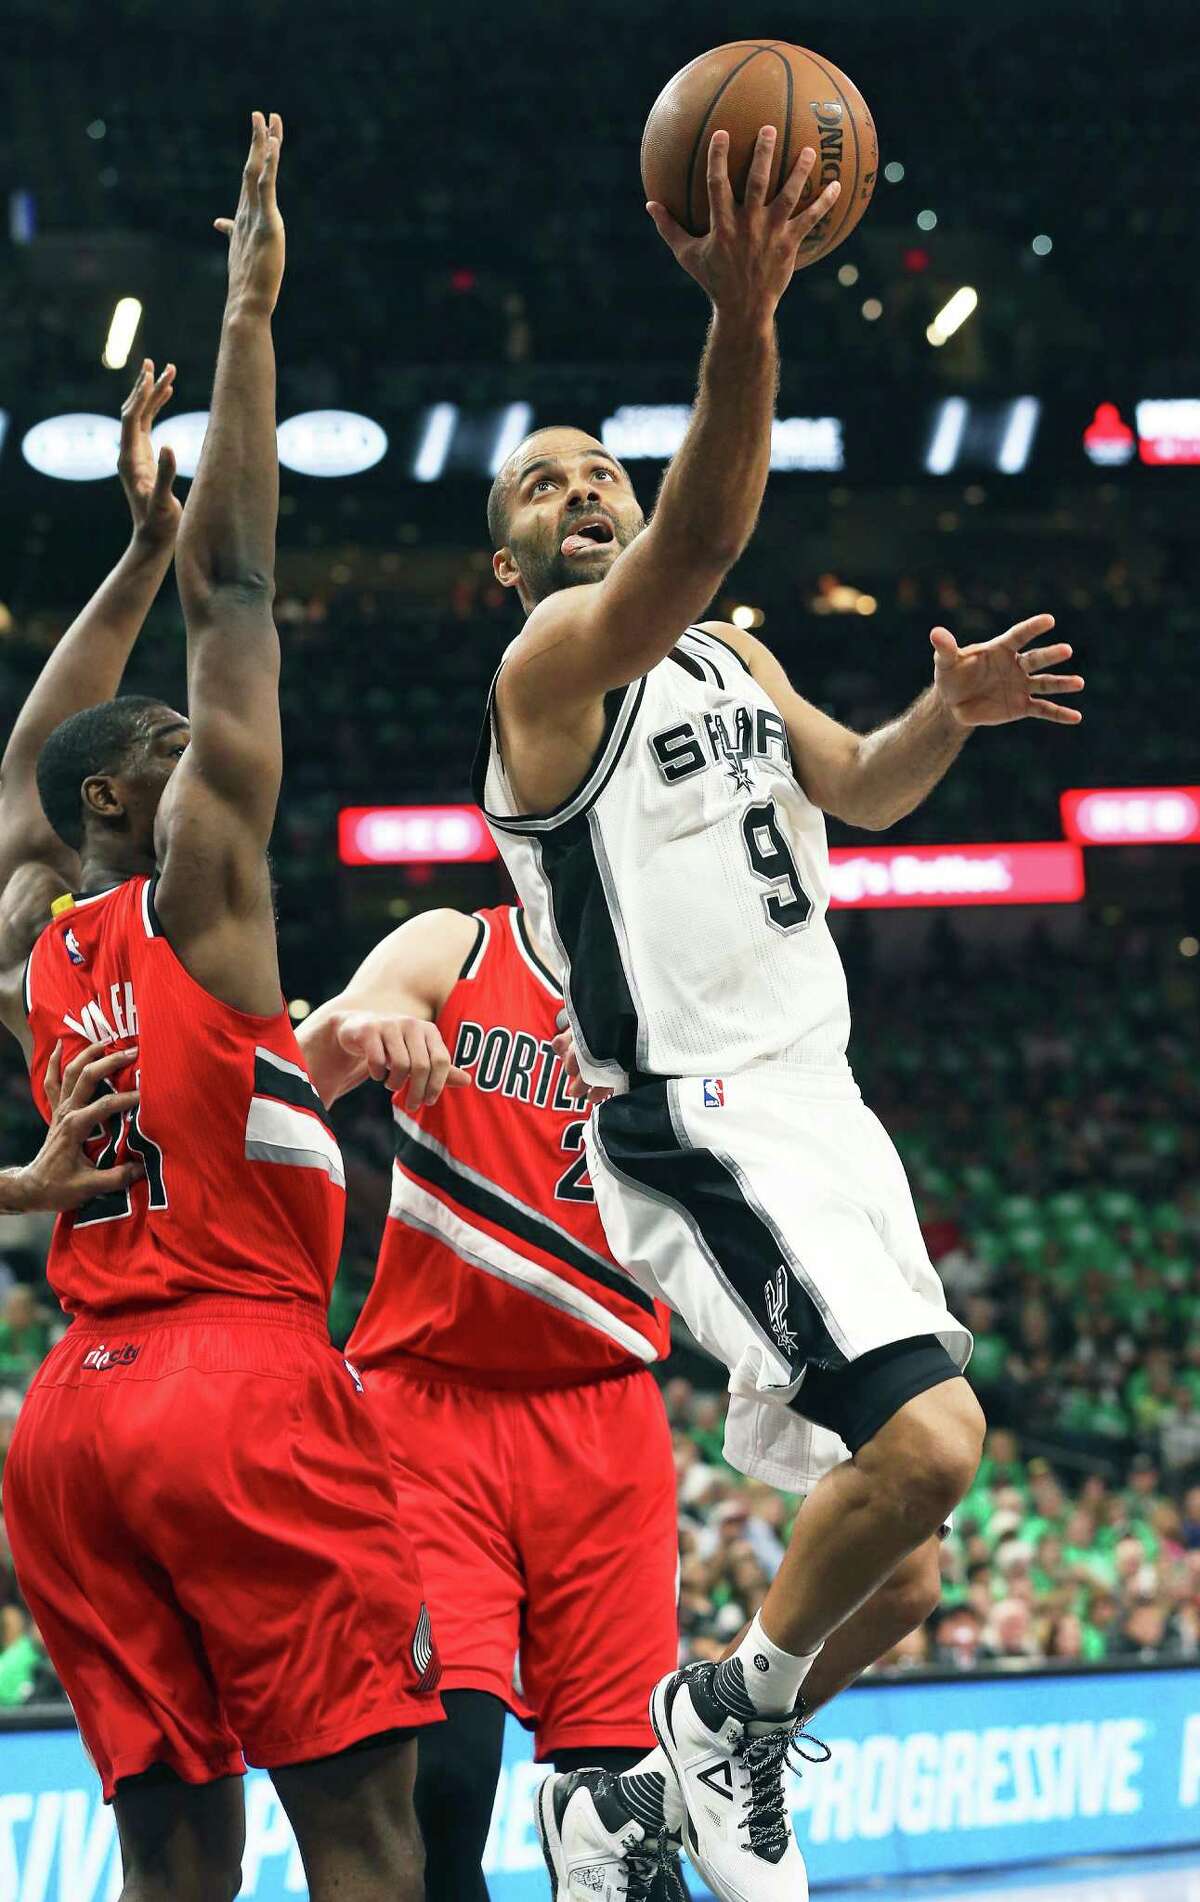 Tony Parker twists in for a layup as the Spurs host the Blazers at the AT&T Center on March 17, 2016.